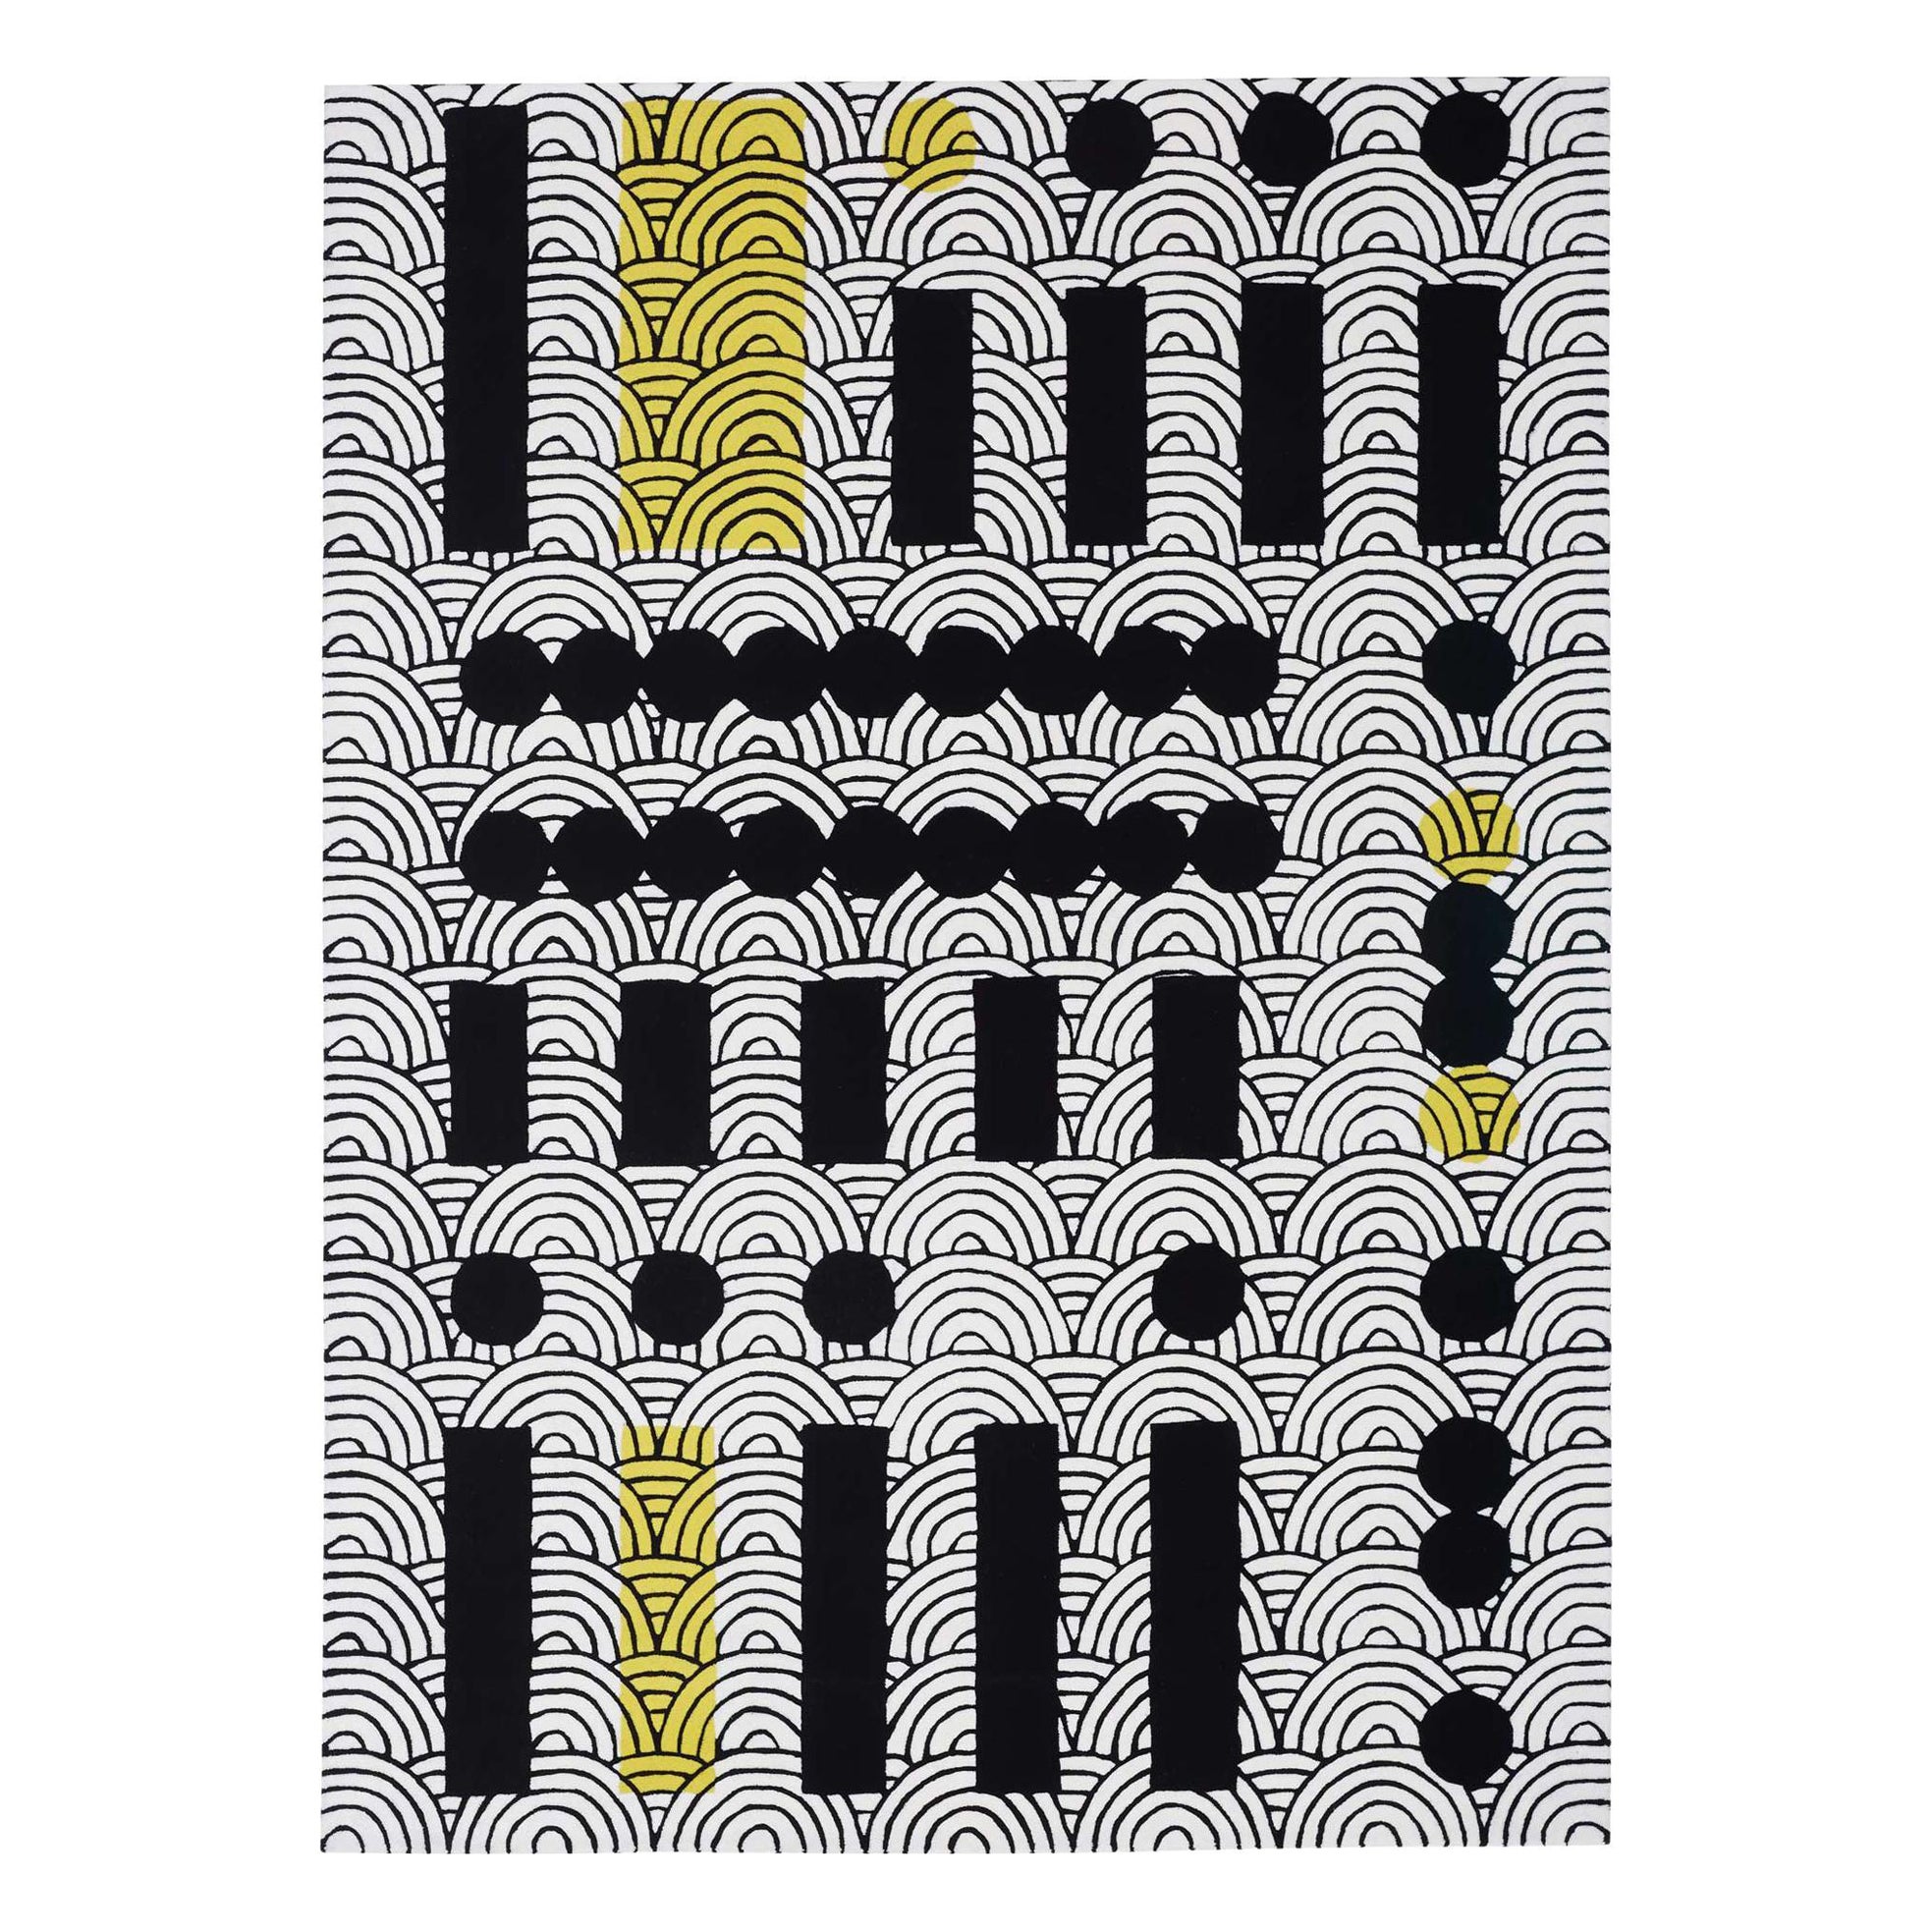 Japanese Abstractions N°2 Rug by Thomas Dariel For Sale